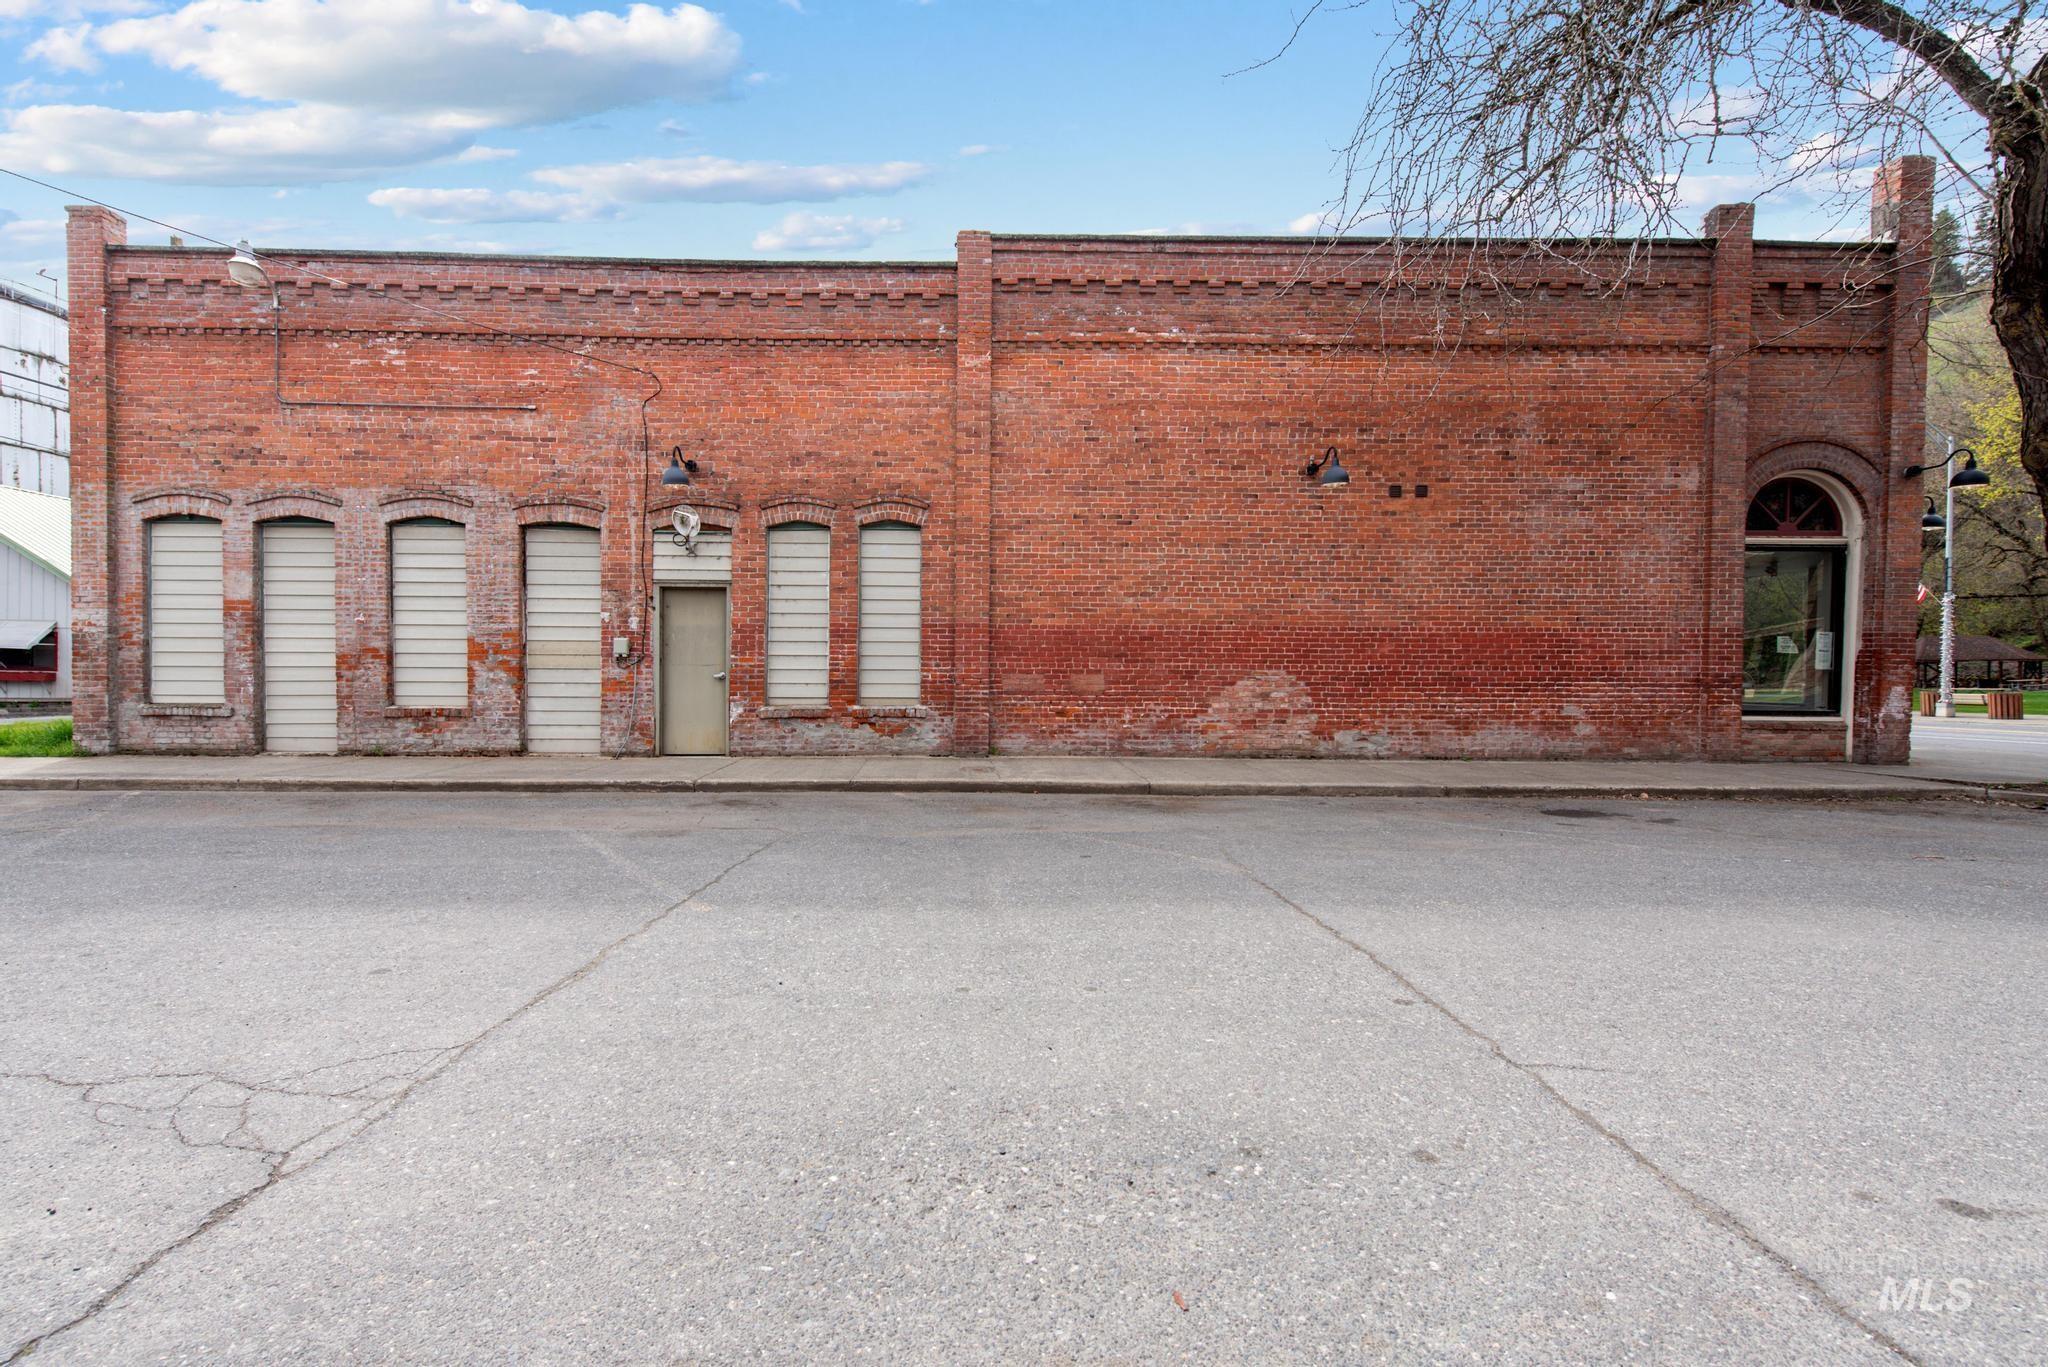 509 E Main St., Kendrick, Idaho 83537, Business/Commercial For Sale, Price $275,000,MLS 98907280